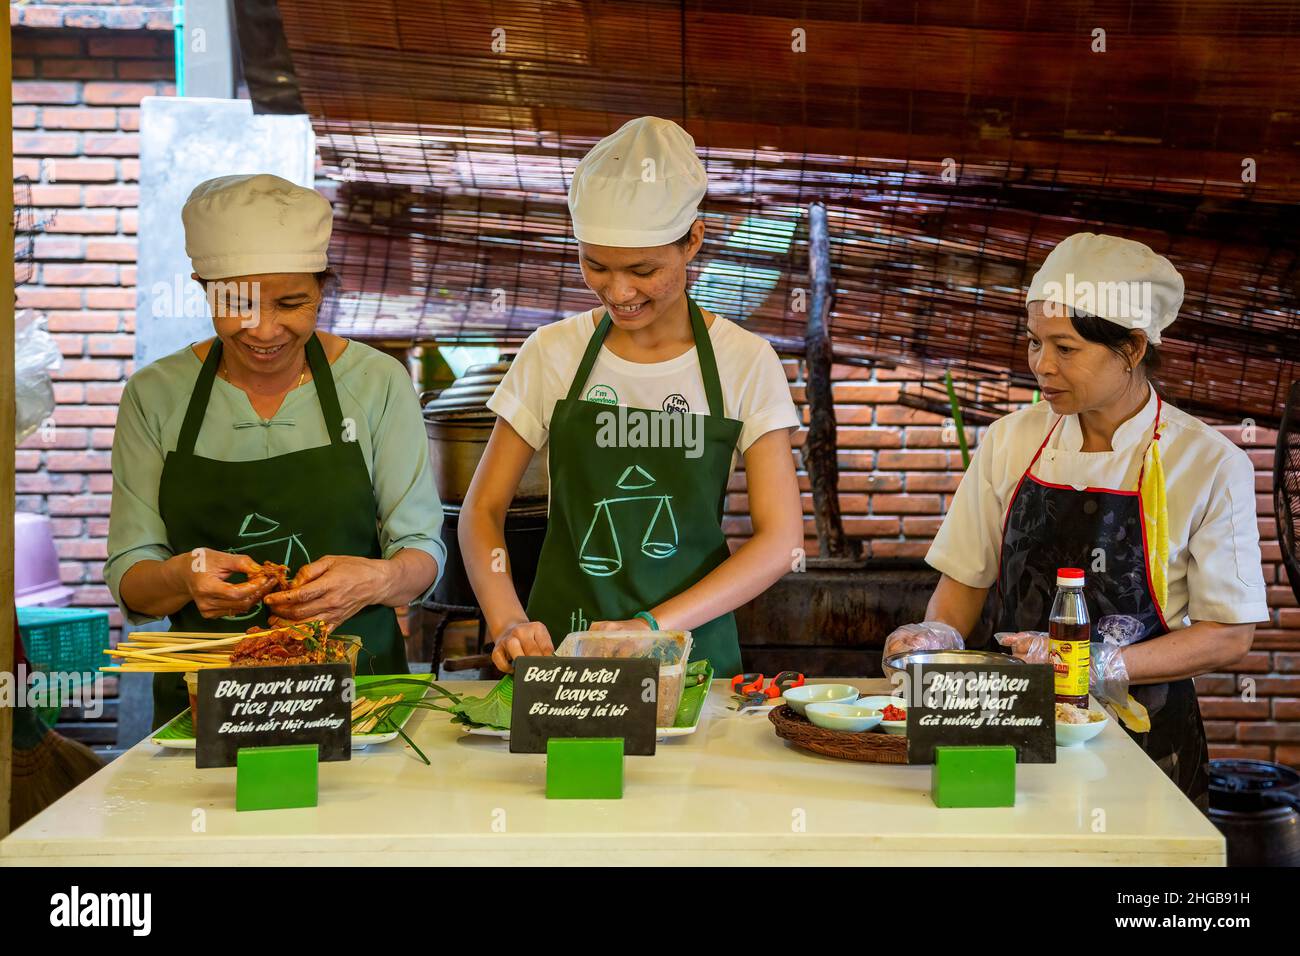 Donne che fanno dimostrazione di cucina, Miss Vy's Cooking Academy, Market Restaurant, Hoi An, Vietnam Foto Stock